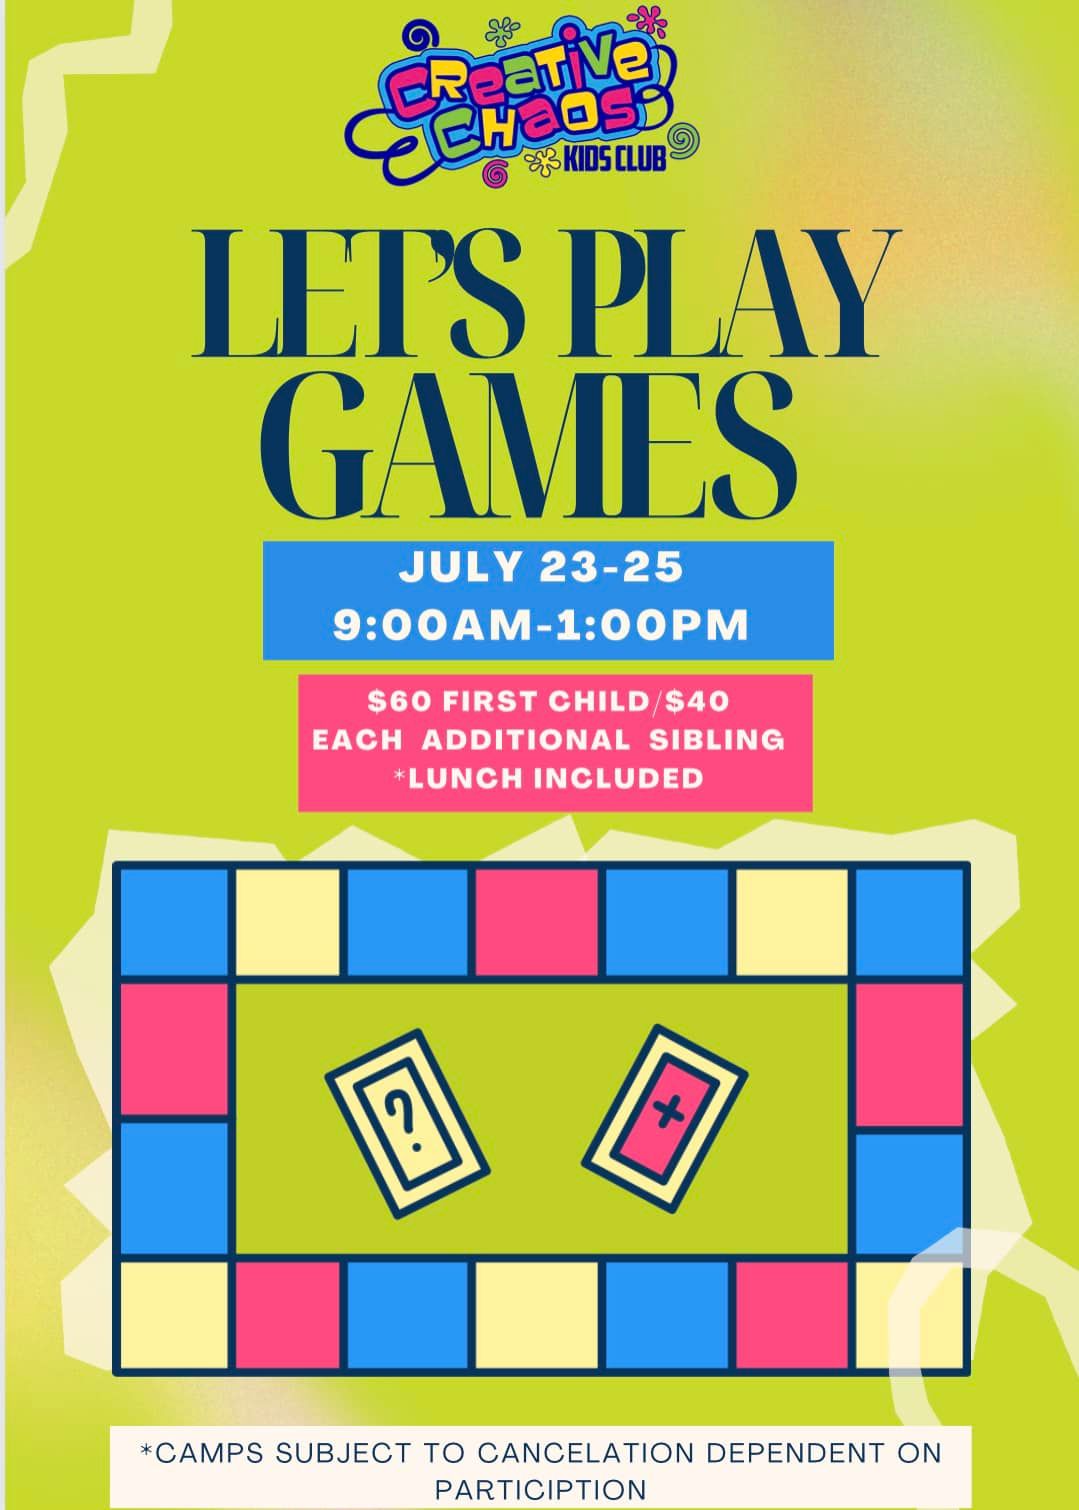 Let's Play Games! Summer Day Camp